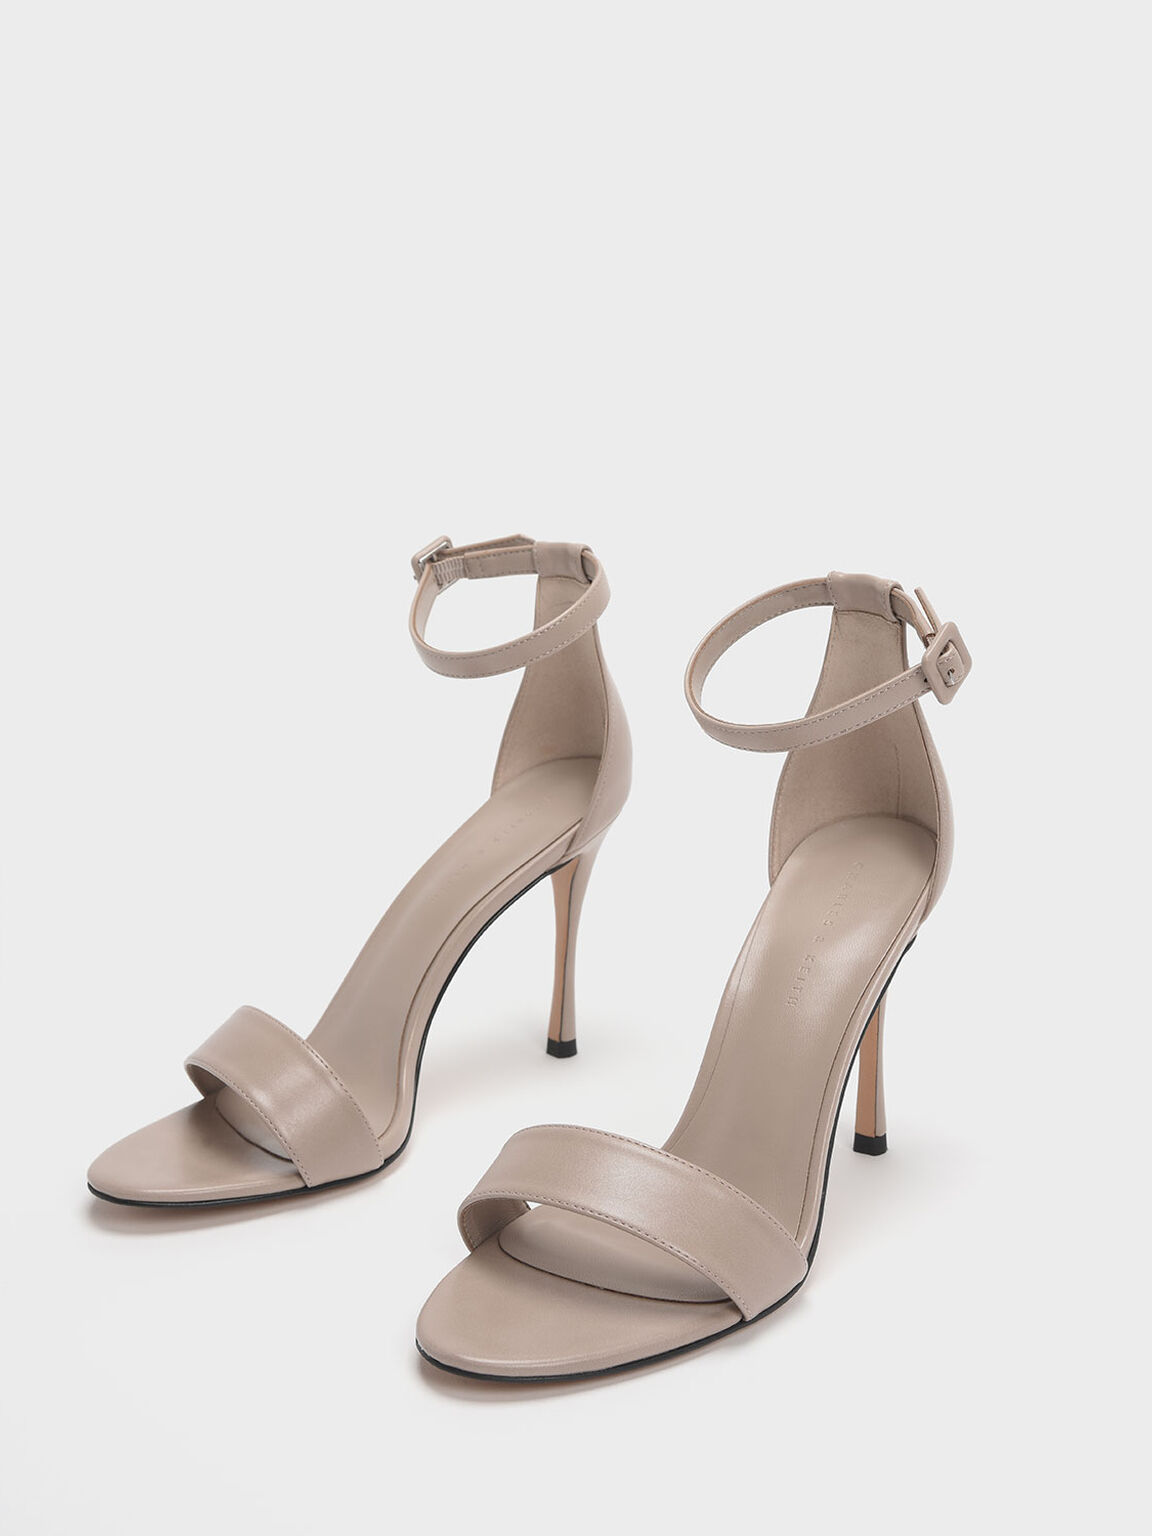 Ankle Strap Stiletto Heels, Nude, hi-res